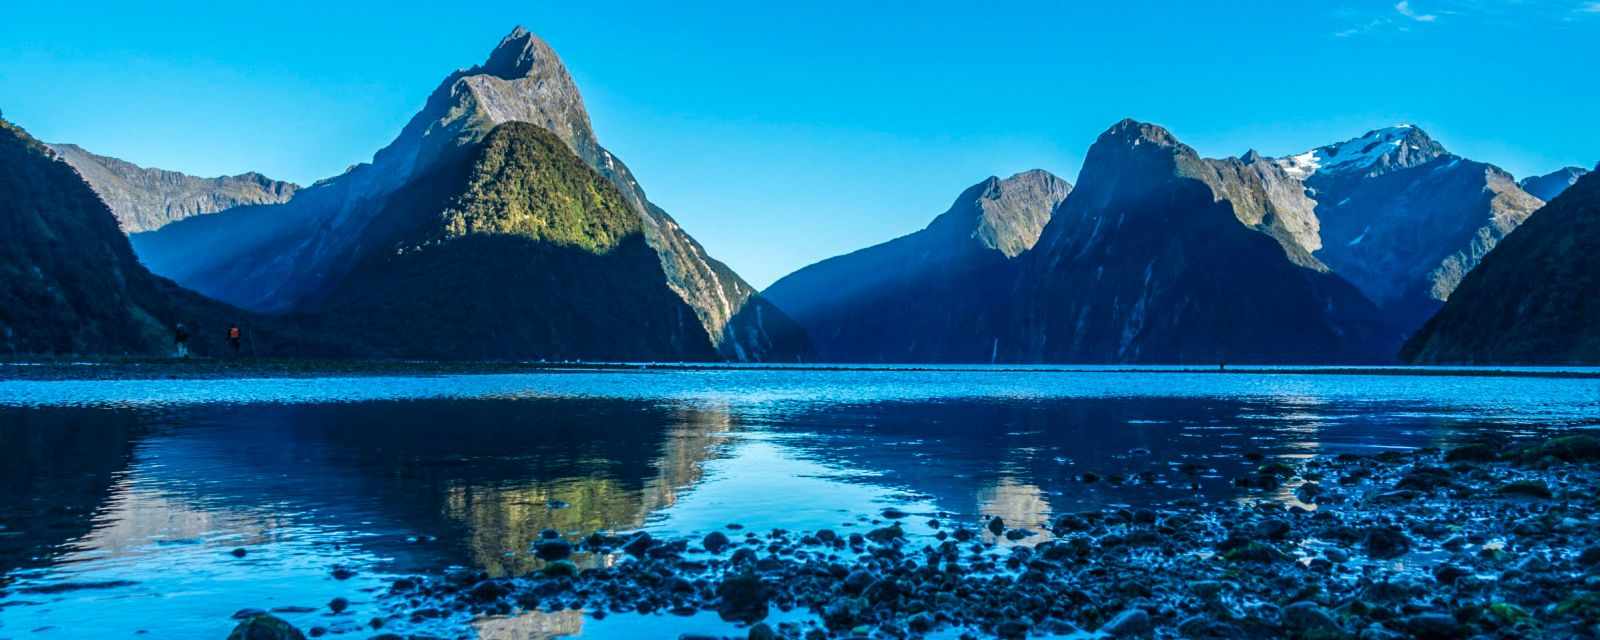 Milford Sound Cruise on a Sunny Day plus Tips and Hikes - One Day Itinerary